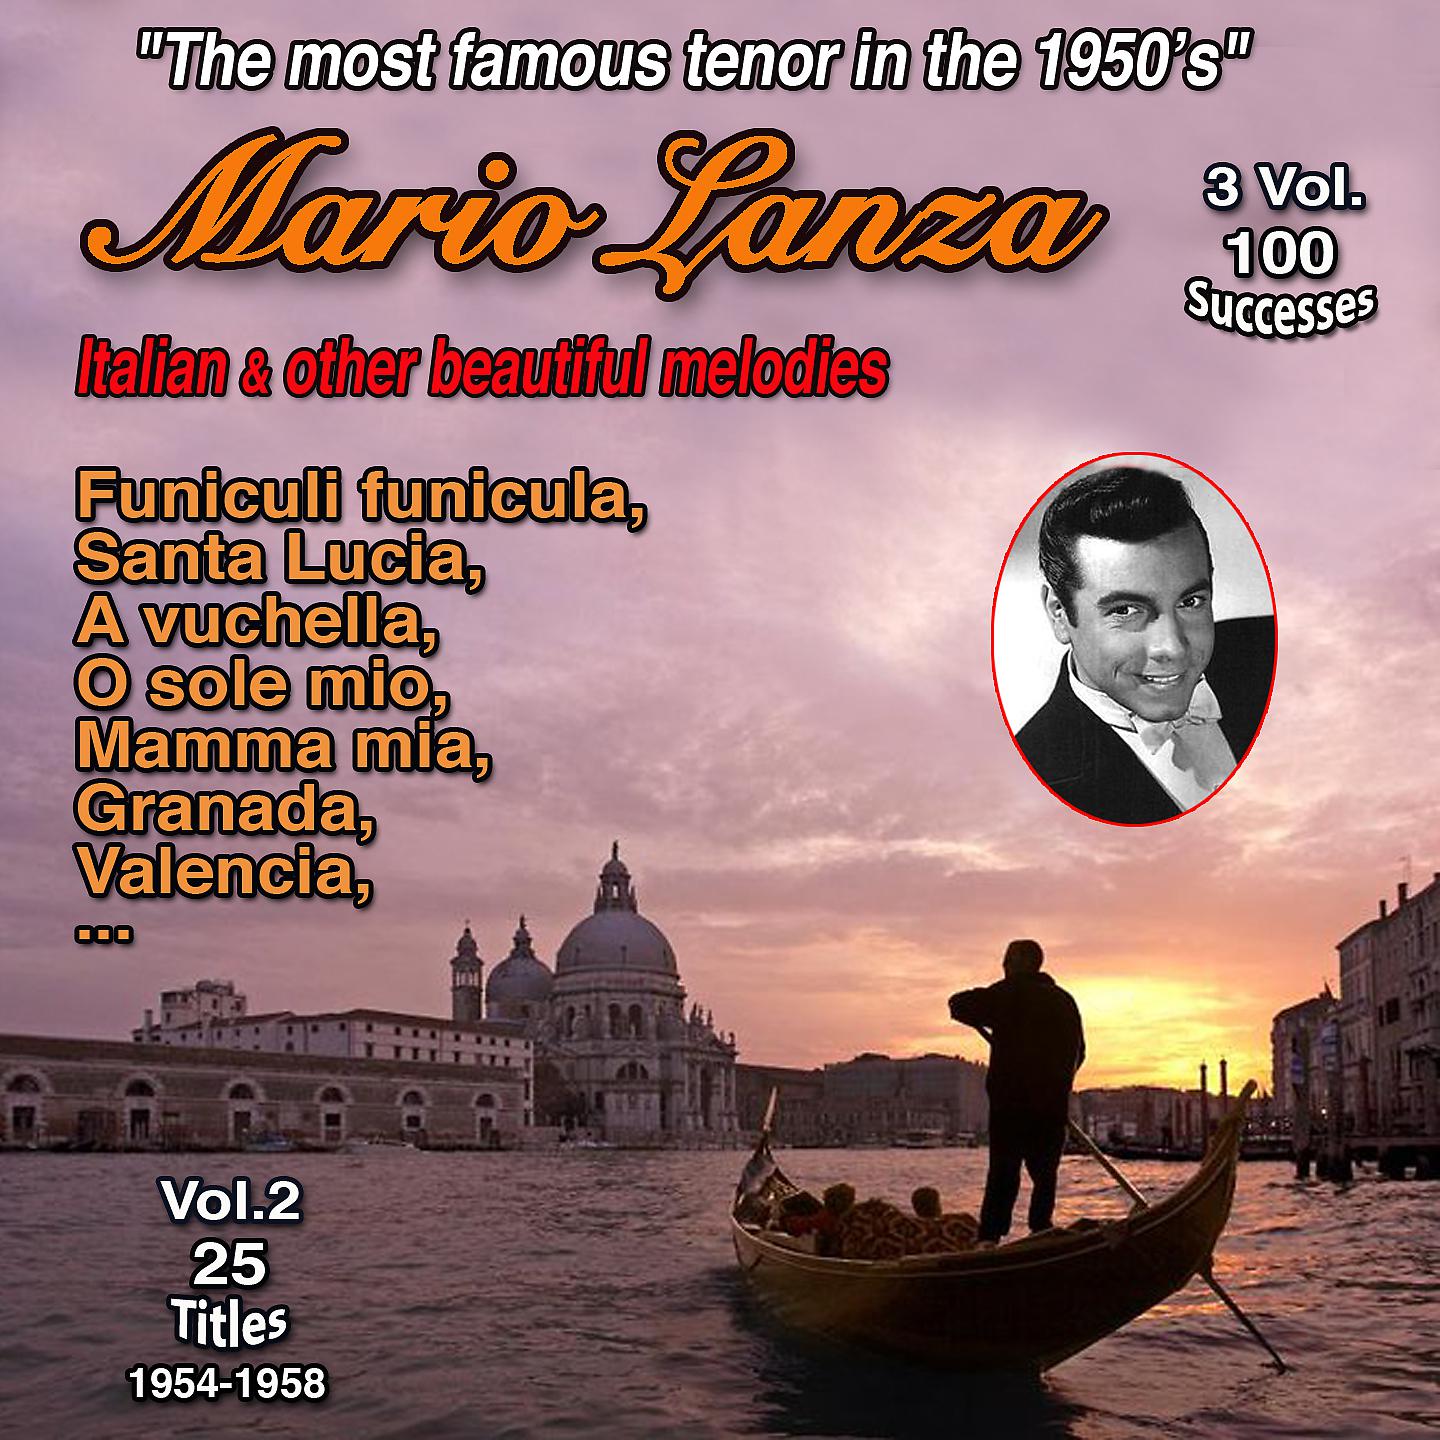 Постер альбома "The most famous tenor in the 1950's": Mario lanza - 3 Vol. 100 successes